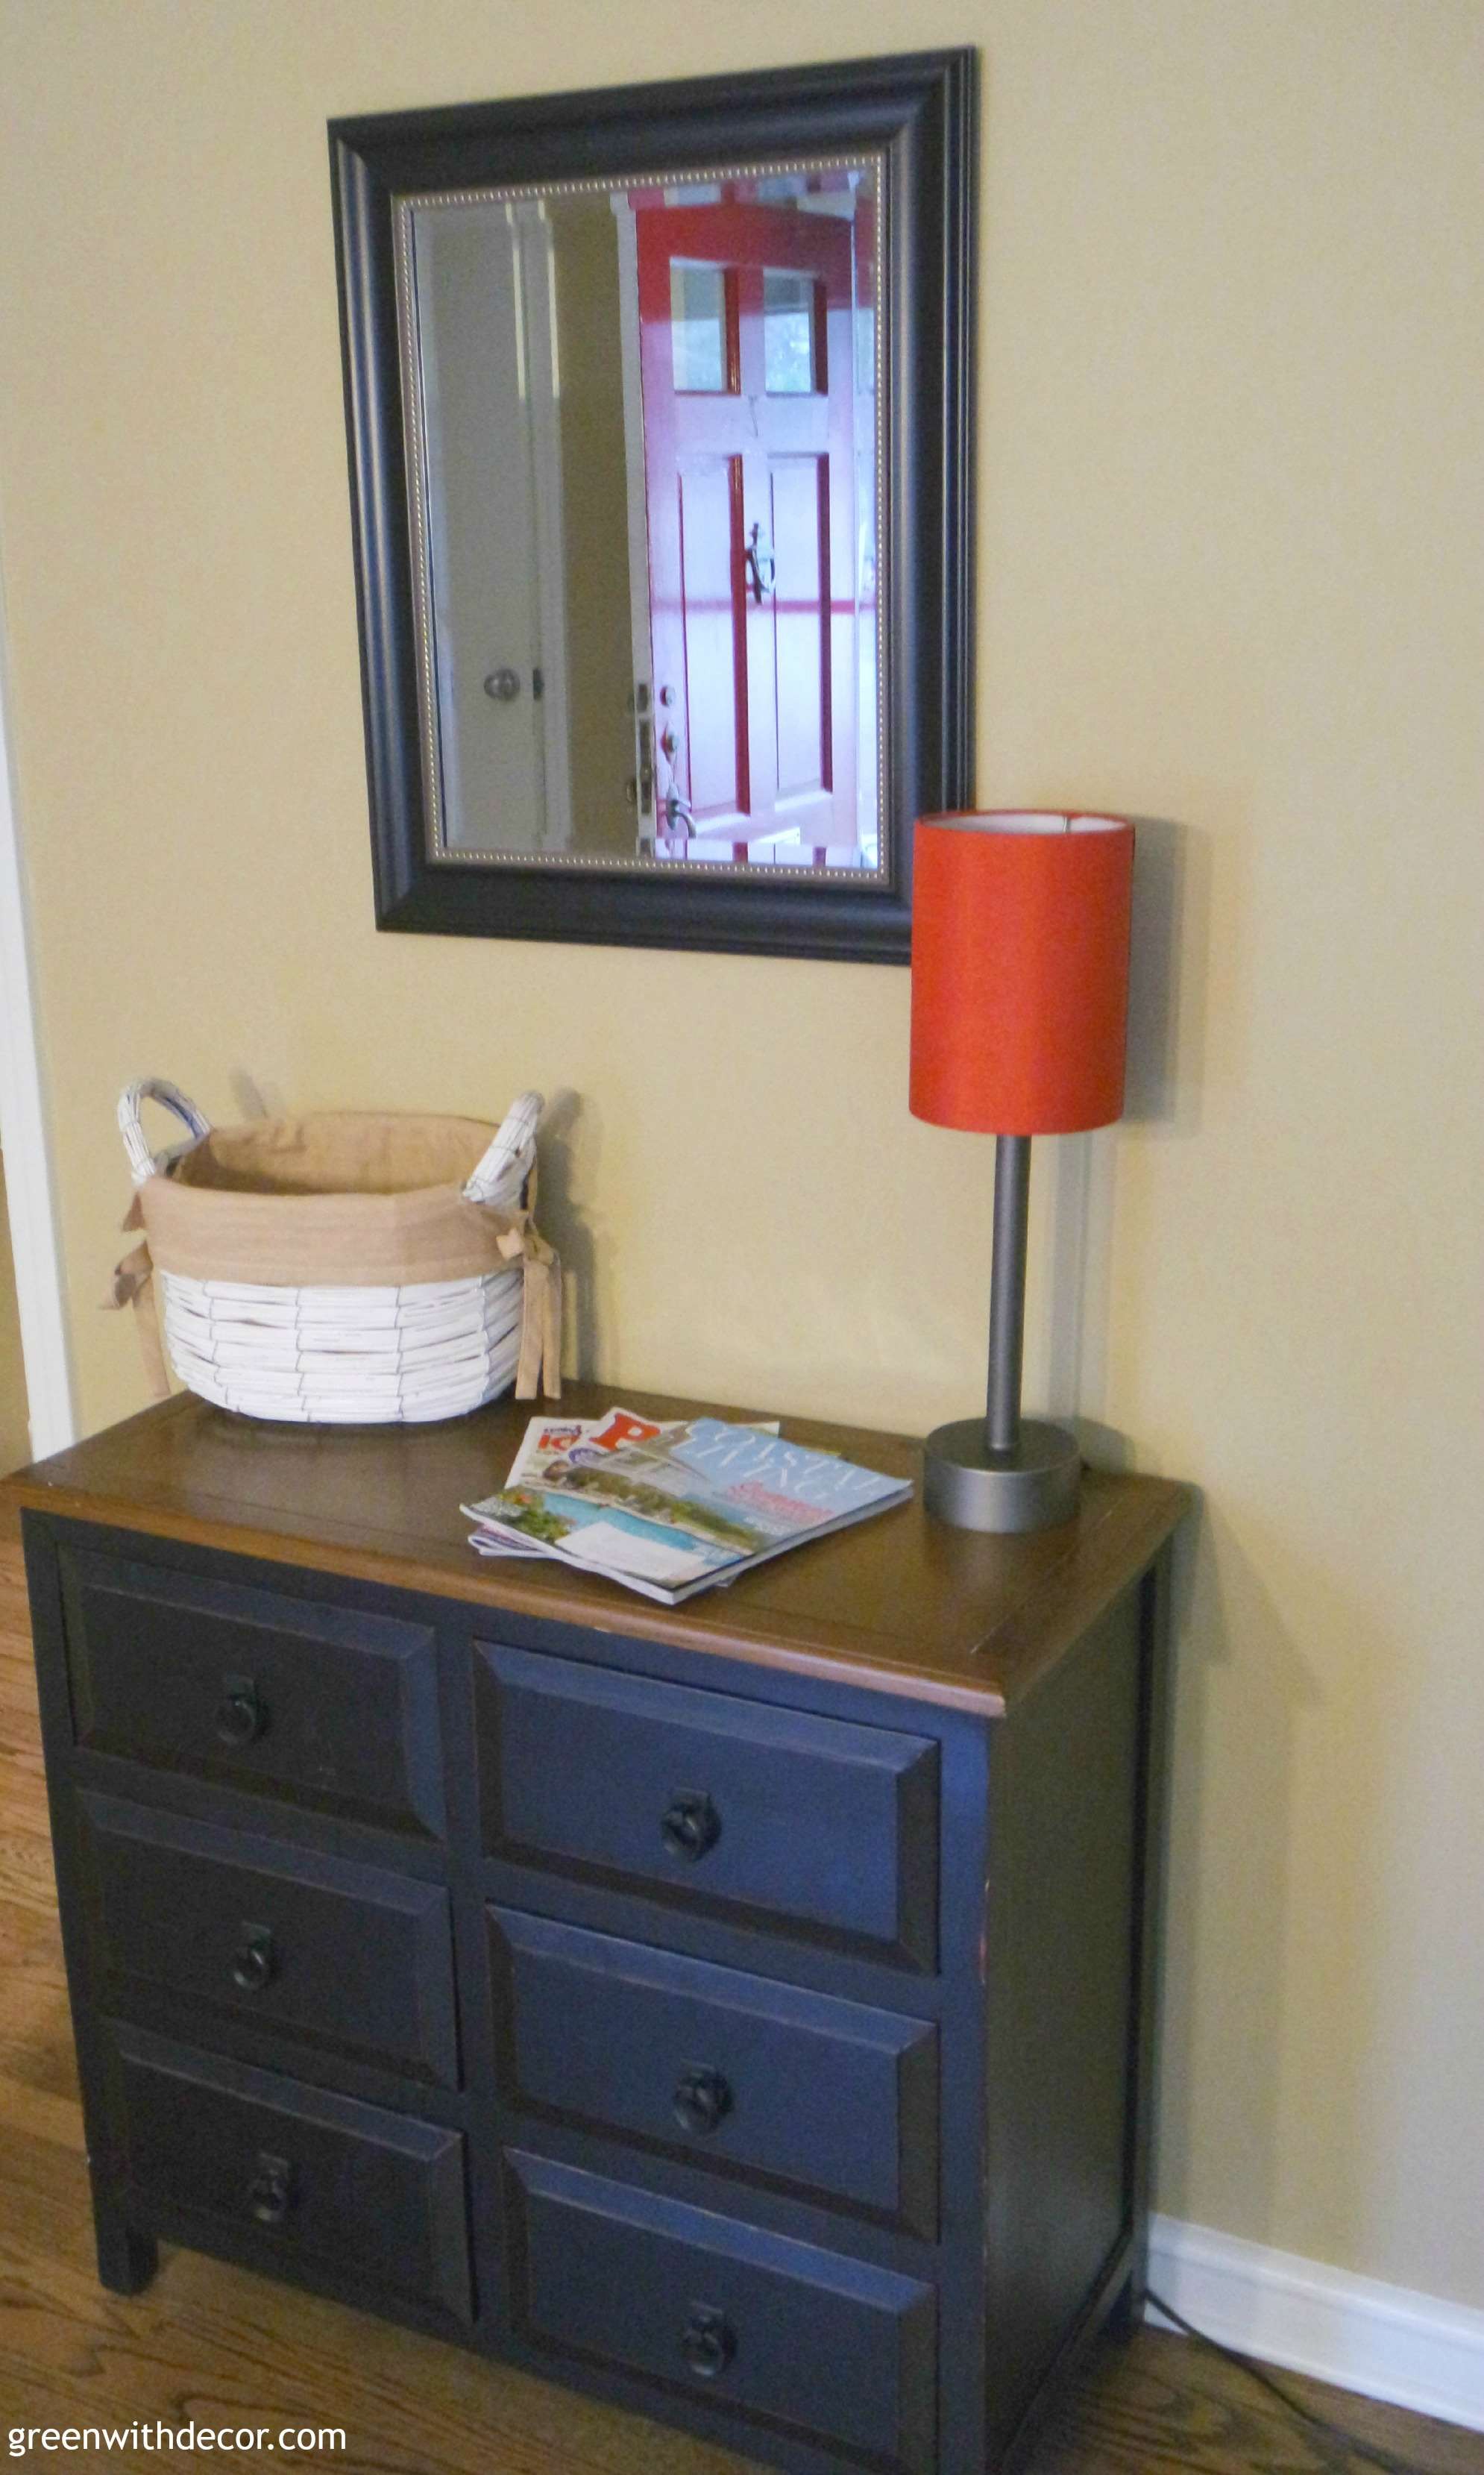 5 Tips For Faking An Entryway Green With Decor